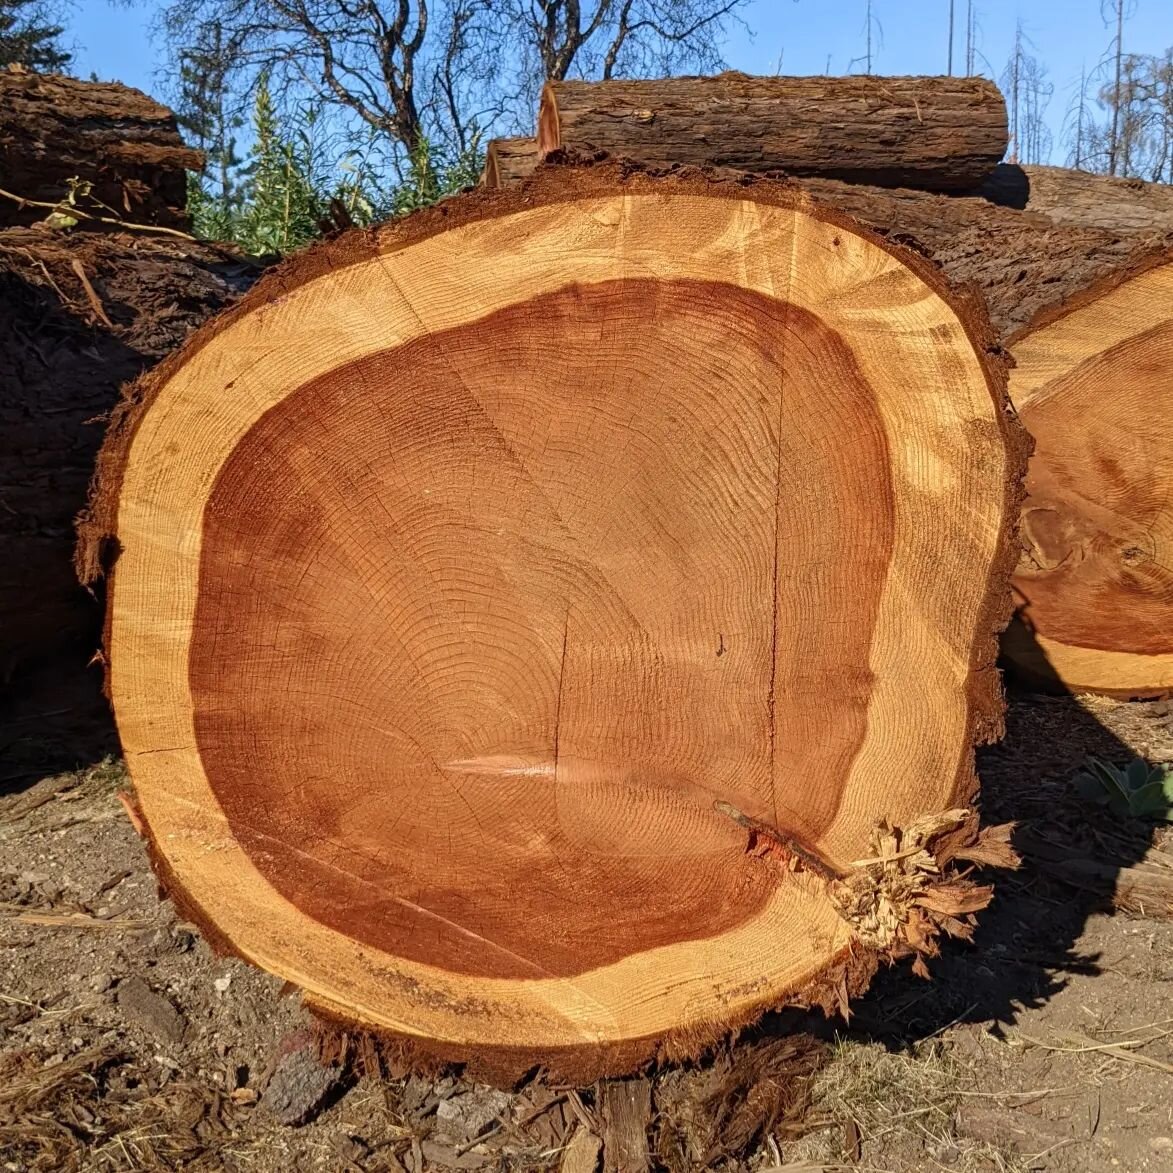 Round and red! 

Spent the morning with Ed @outofthewoodsmill looking at some logs for the next exciting step of our research on California oaks suitability for cooperage @natureatcal . First pic is a redwood, not an oak. But it was so nice. Some oth